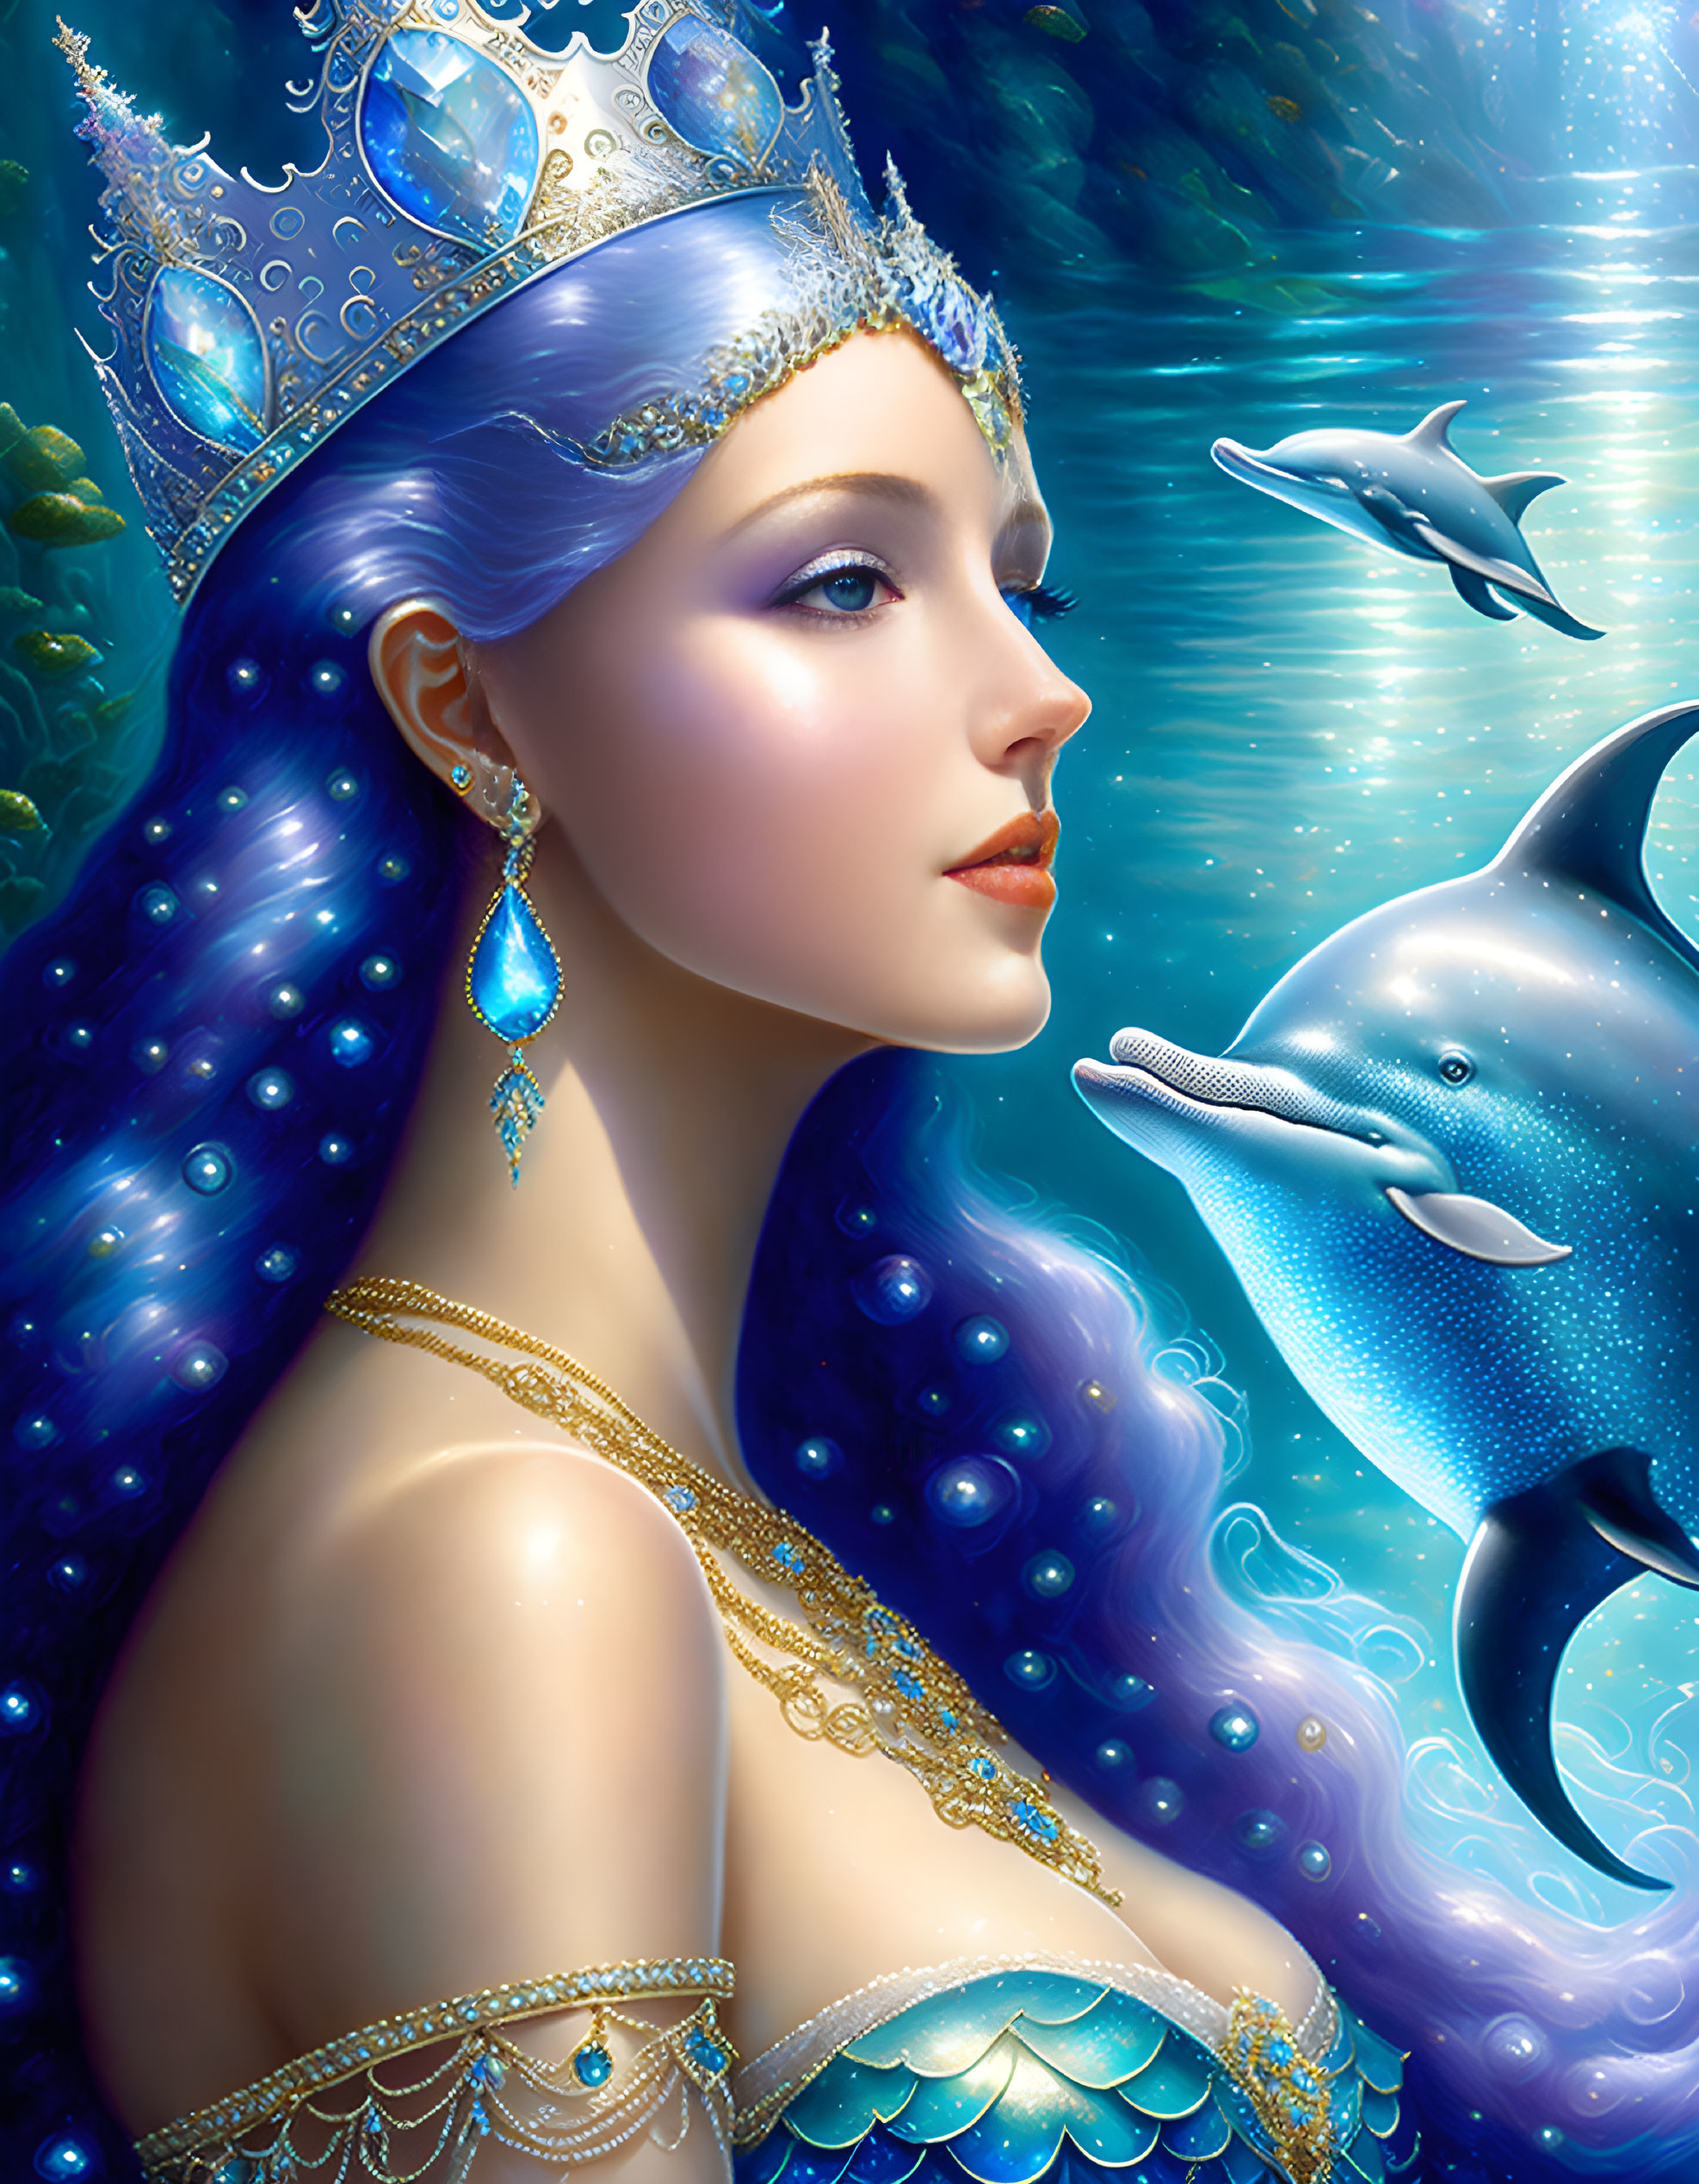 Regal Woman with Blue Hair and Crown Beside Dolphin in Underwater Scene